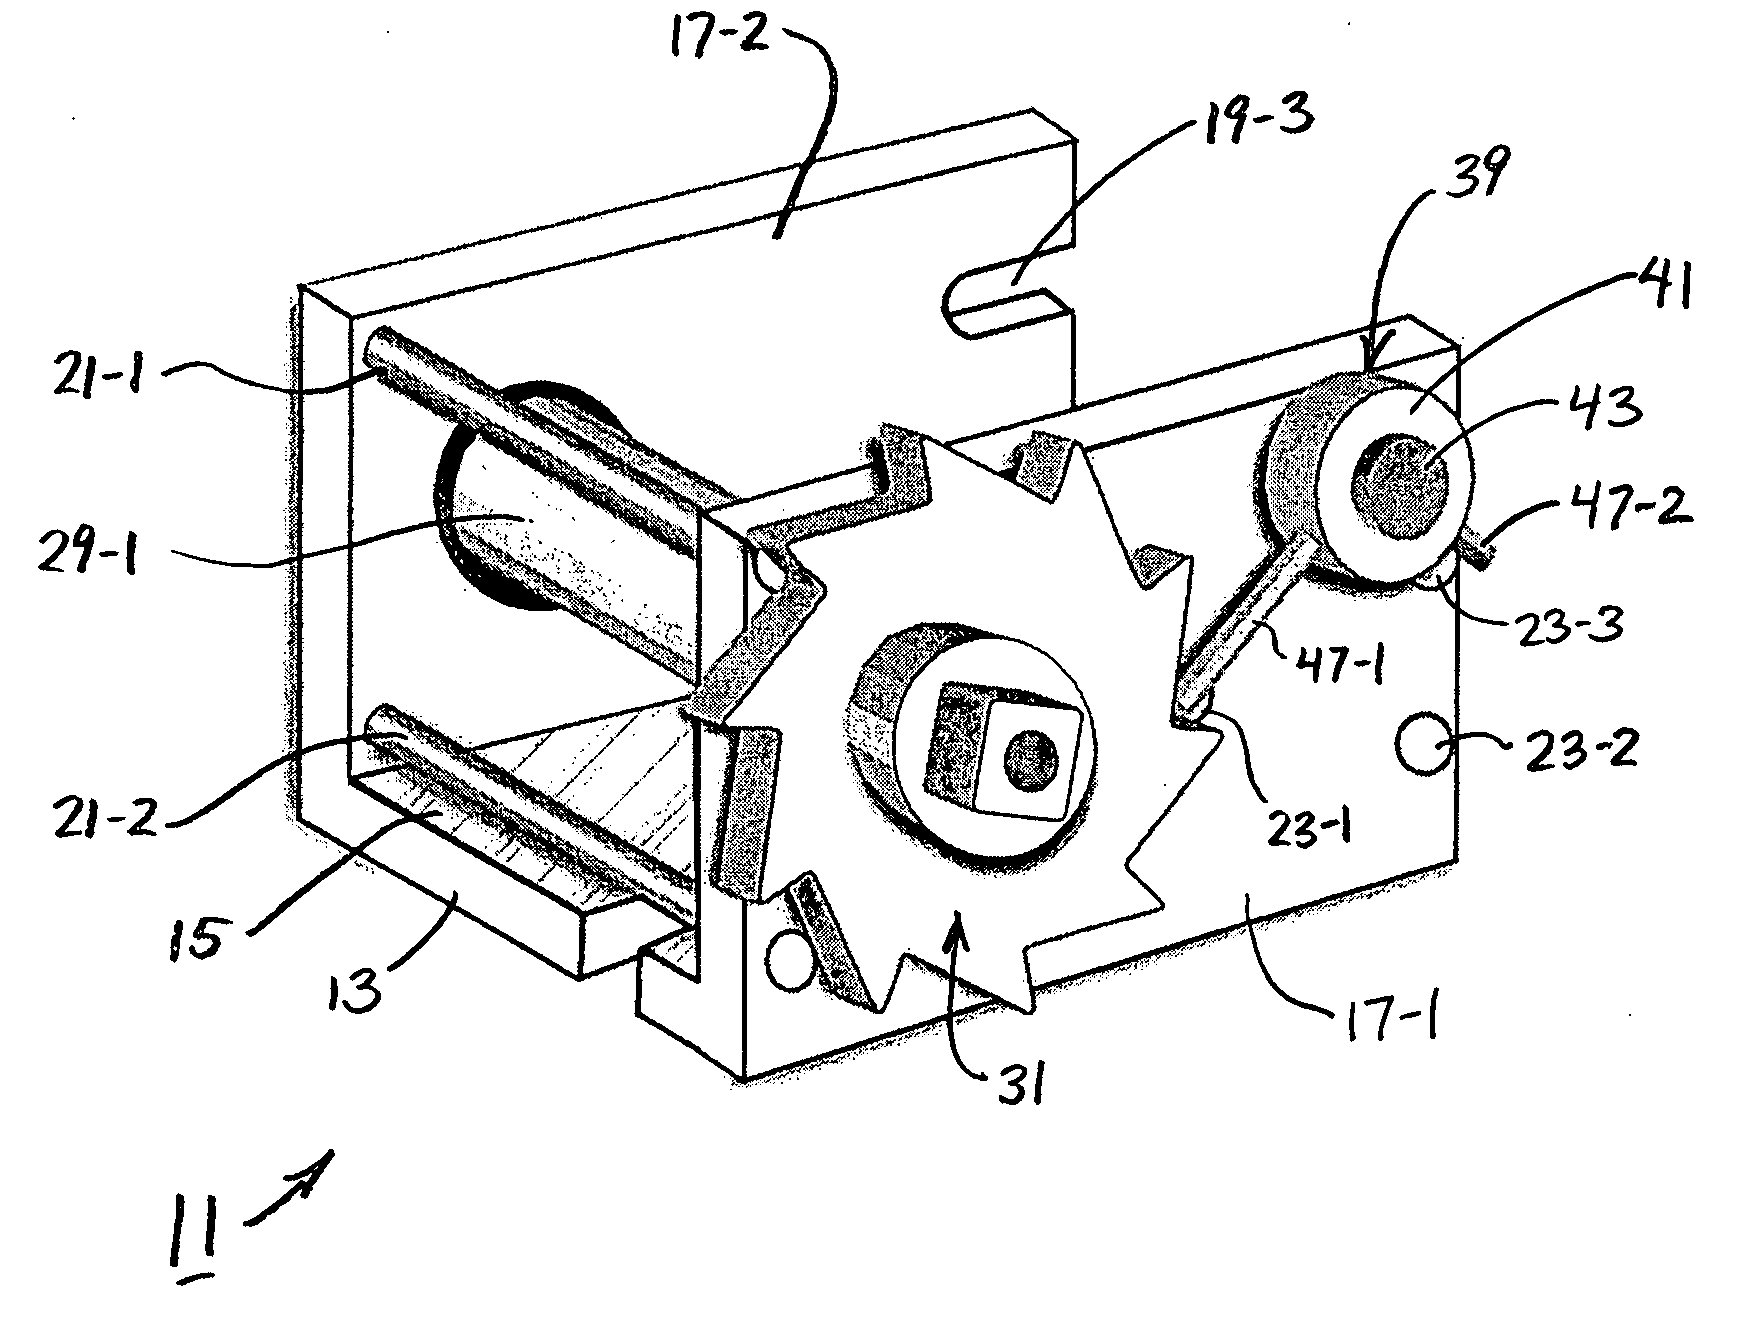 Ratcheting winch with a magnetically biased pawl